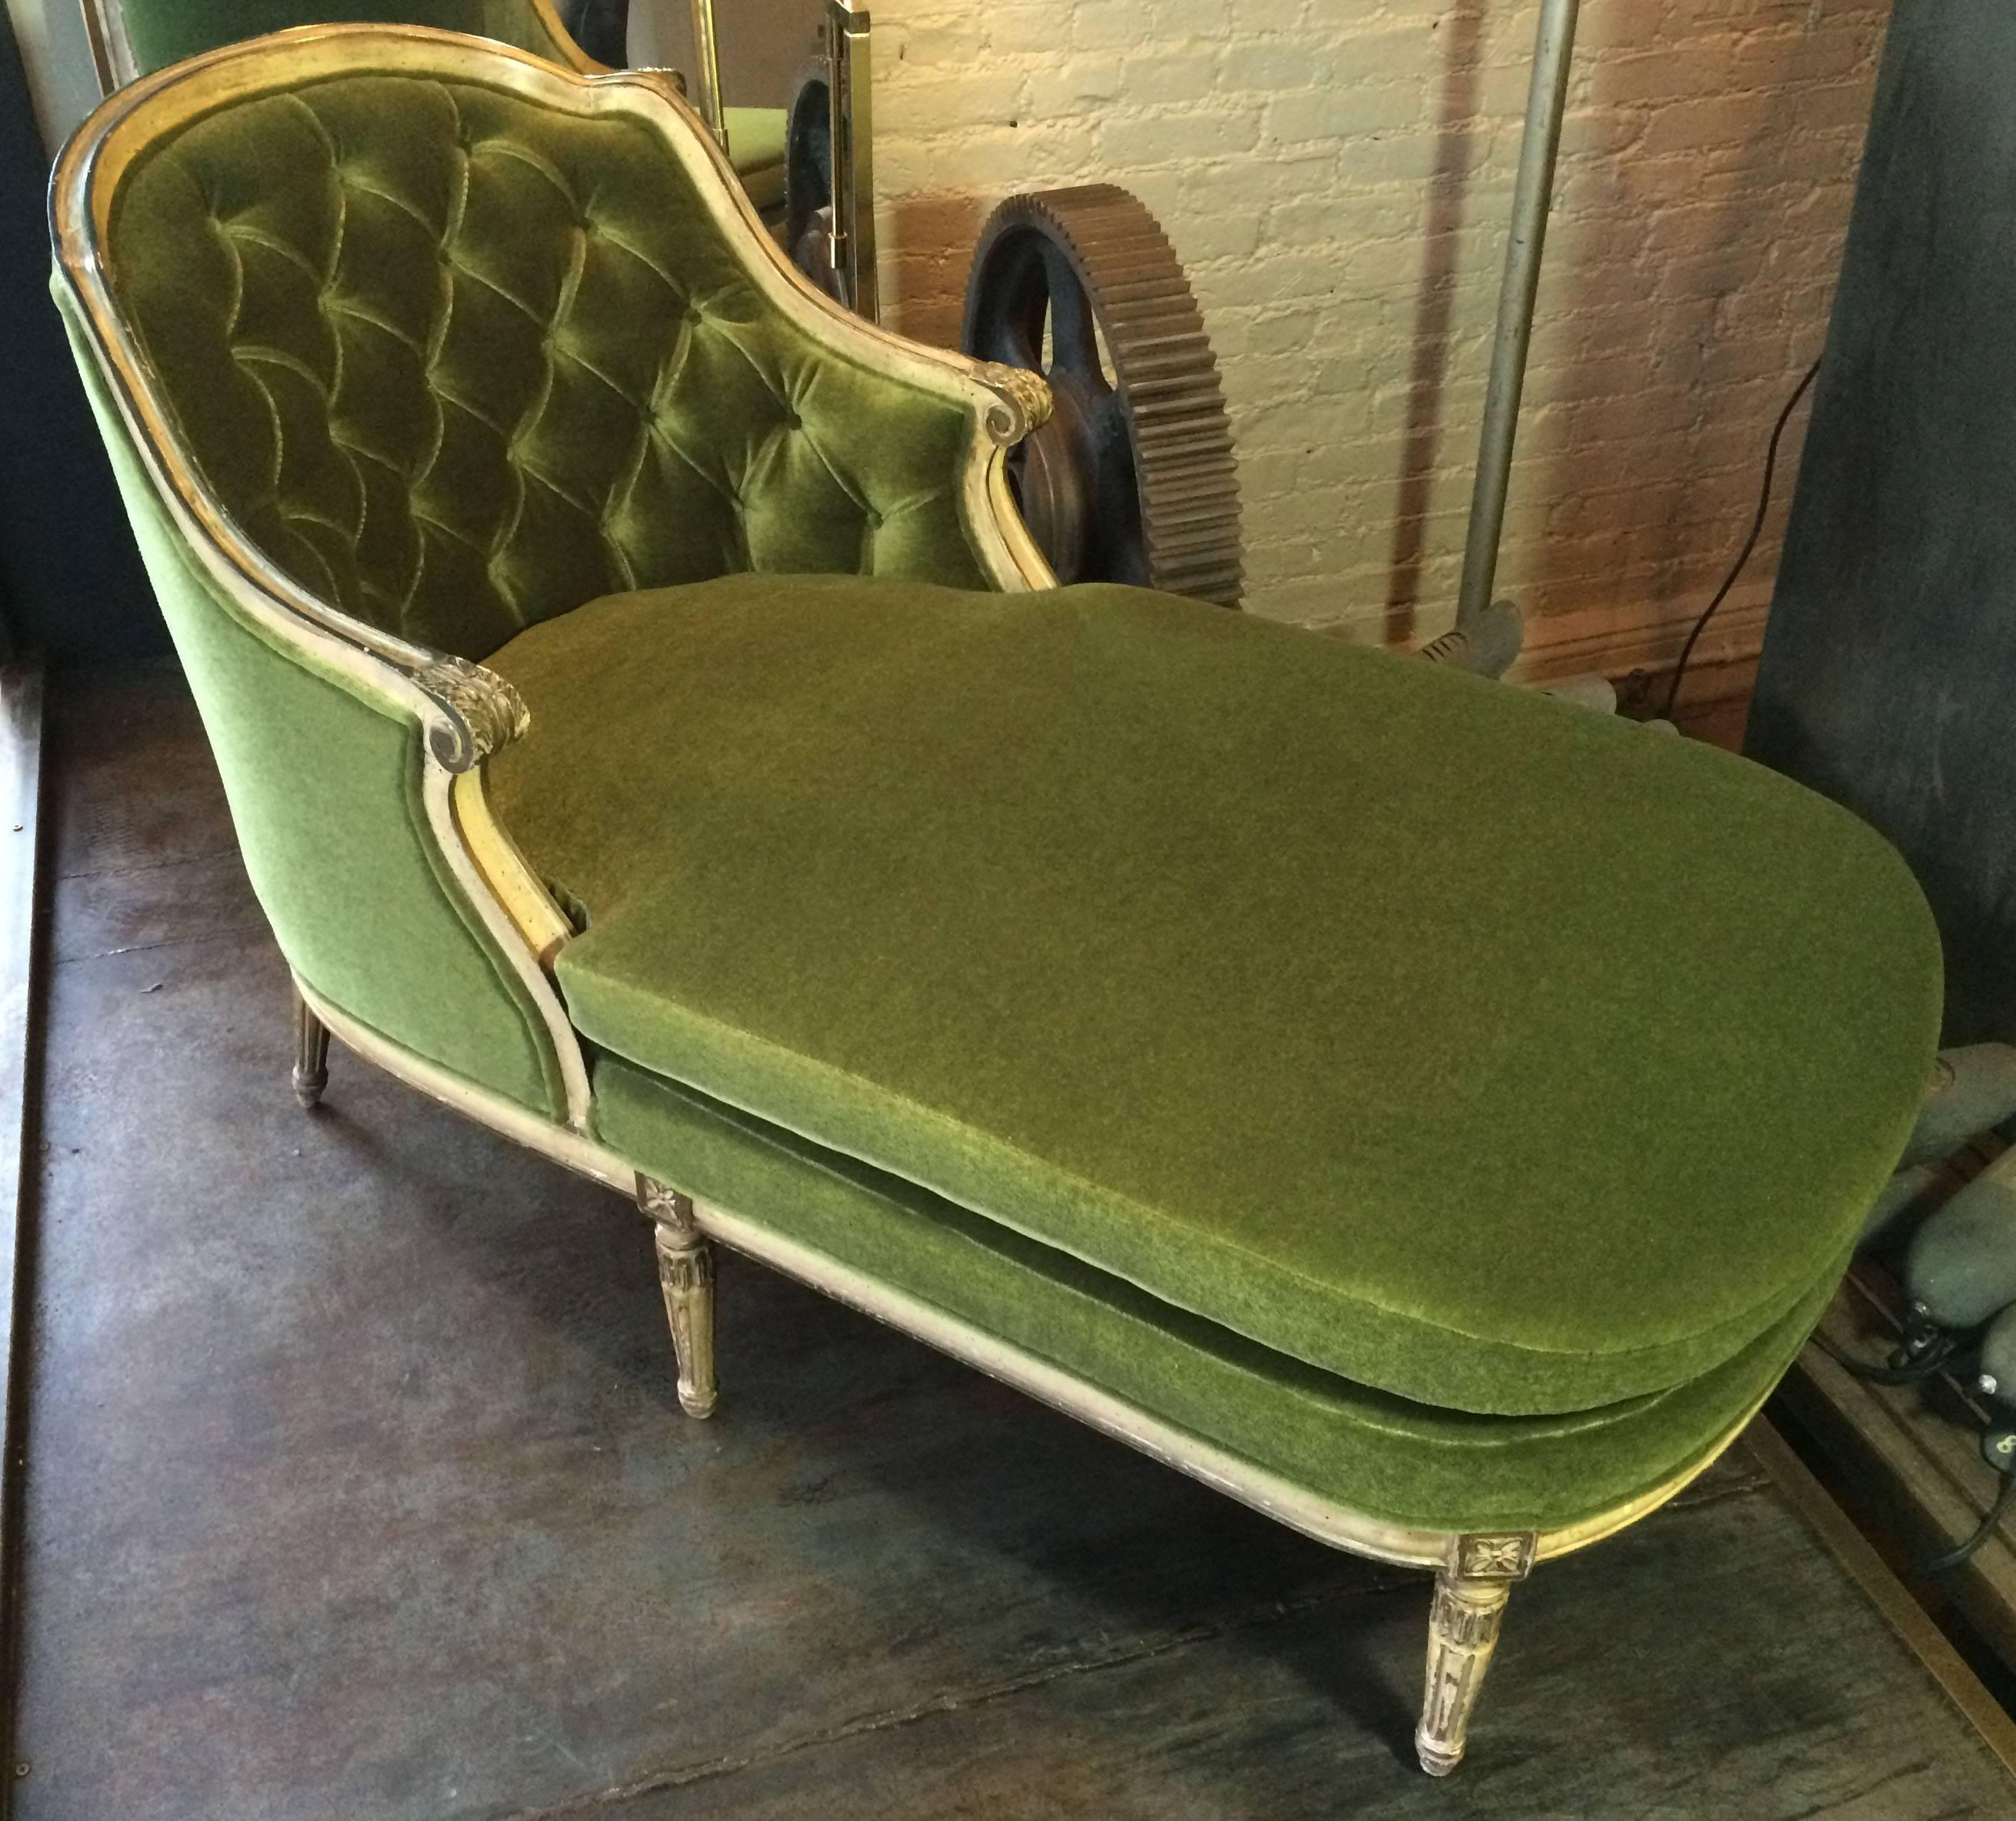 Early 20th century, French chaise longue / chaise longue / fainting couch in the Louis XVI style. The mahogany frame has been left untouched in its original patina to wonderfully contrast the brand new emerald green mohair upholstery.